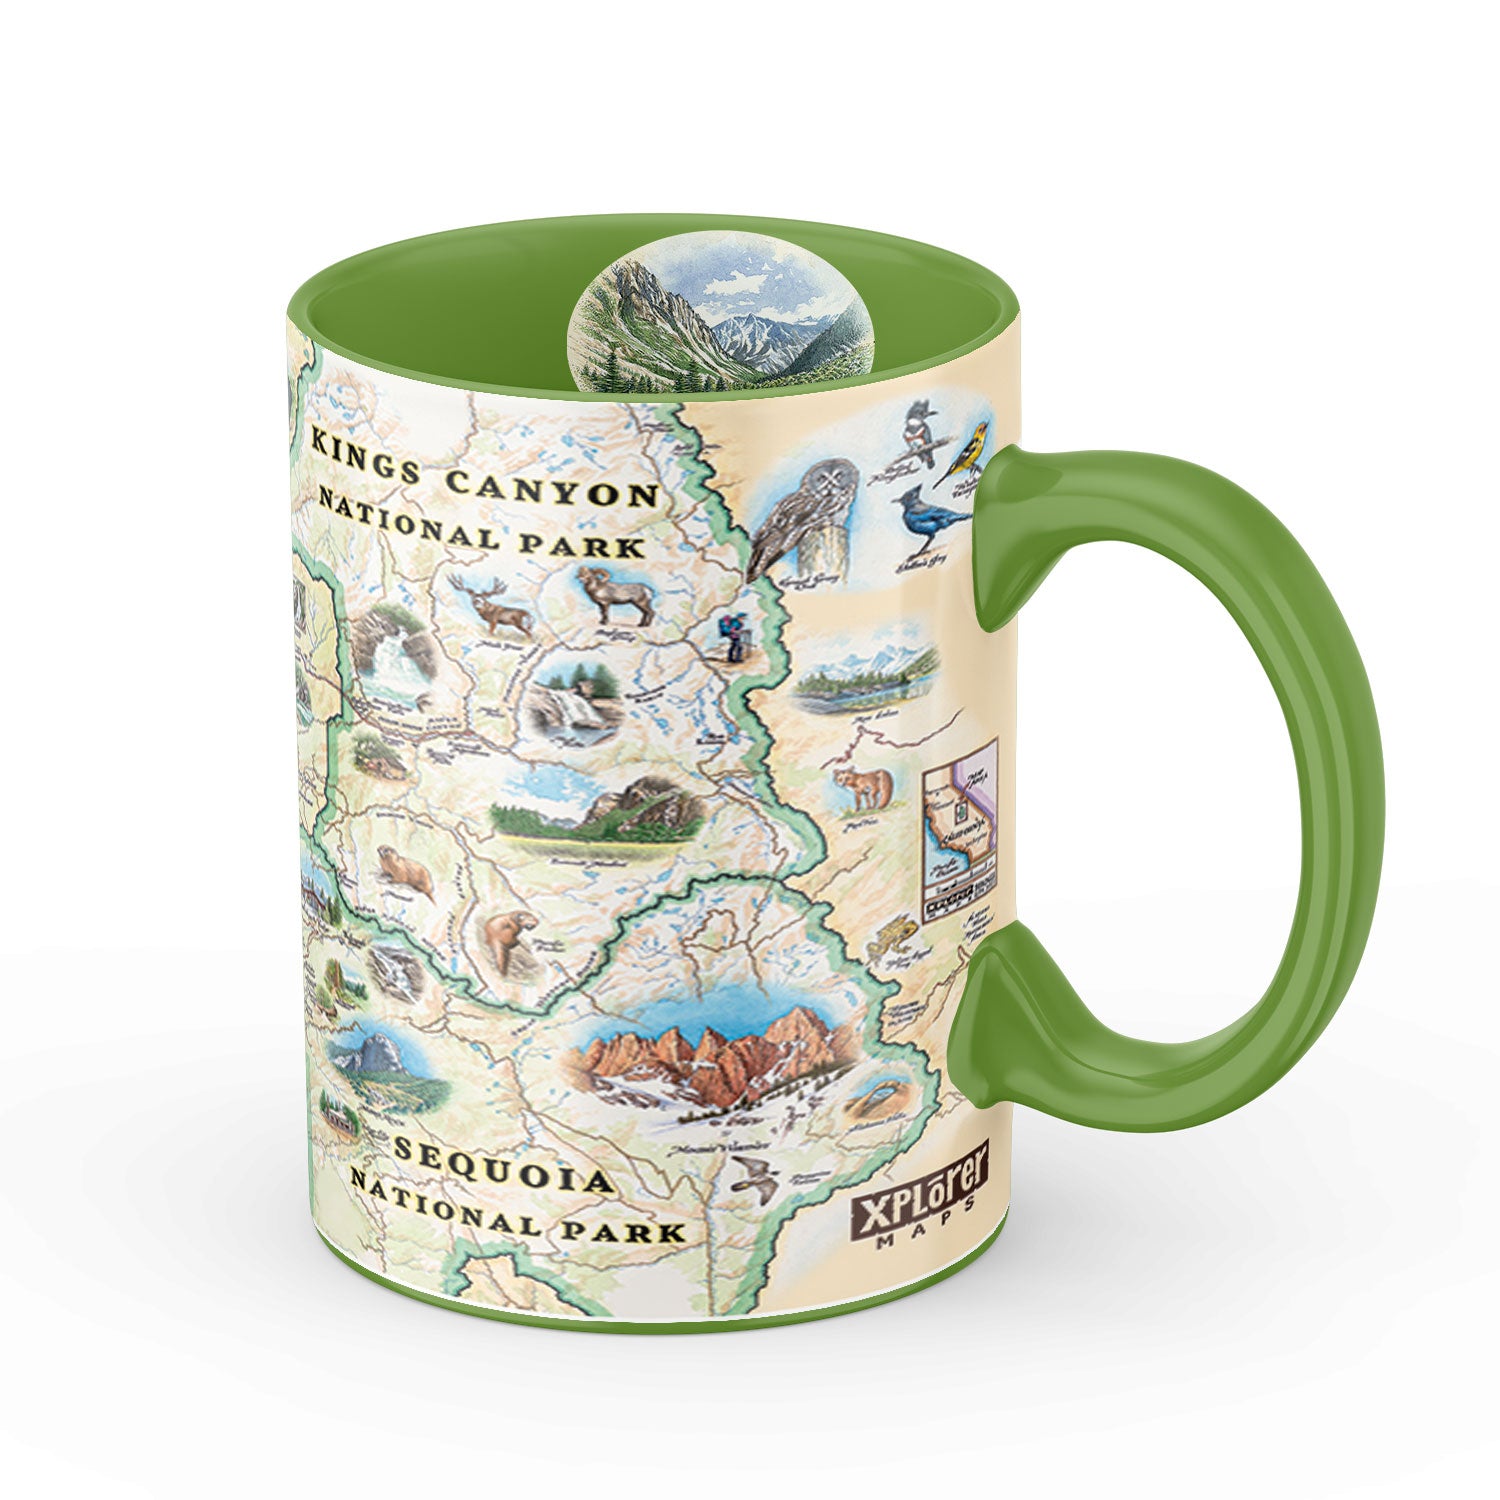 Green Sequoia & Kings Canyon National Parks ceramic mug. The map features illustrations of the Giant Forest, Mount Whitney, and the John Muir Lodge. Flora and fauna include mule deer, red fox, Sierra Purple shooting star flowers, and California poppy. Map measures 18x24.